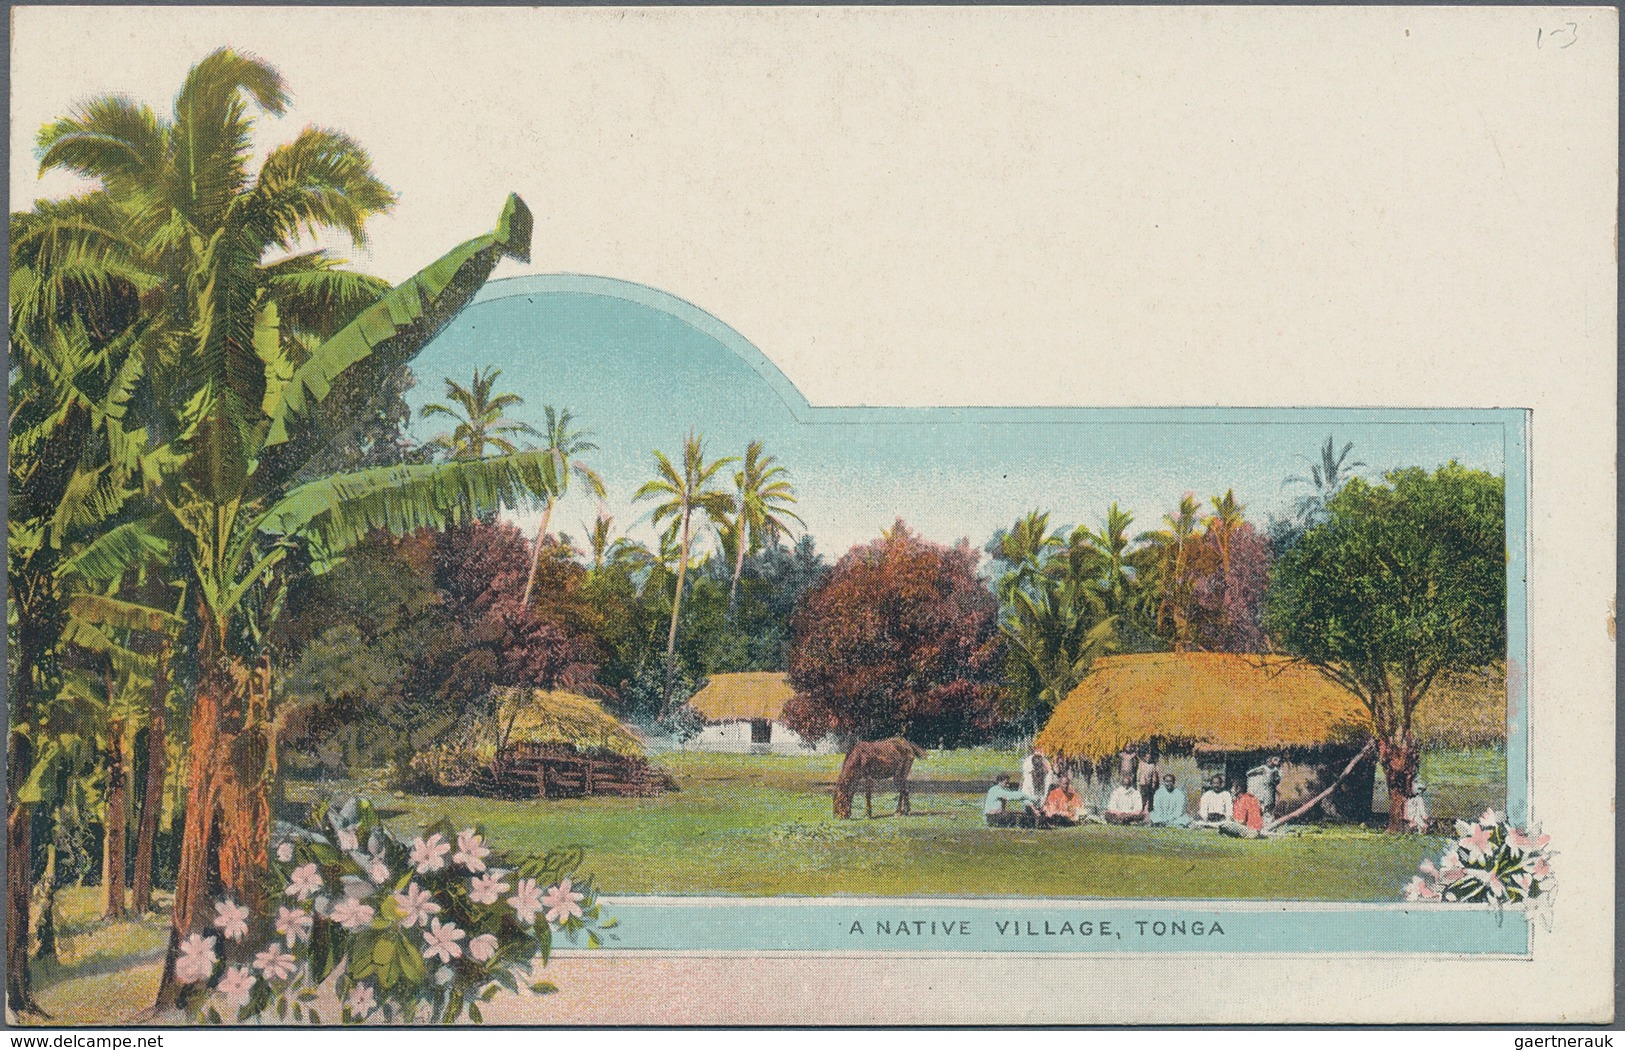 Tonga: 1907, four pictorial stat. postcards 1d. native tree showing different views on reverse incl.